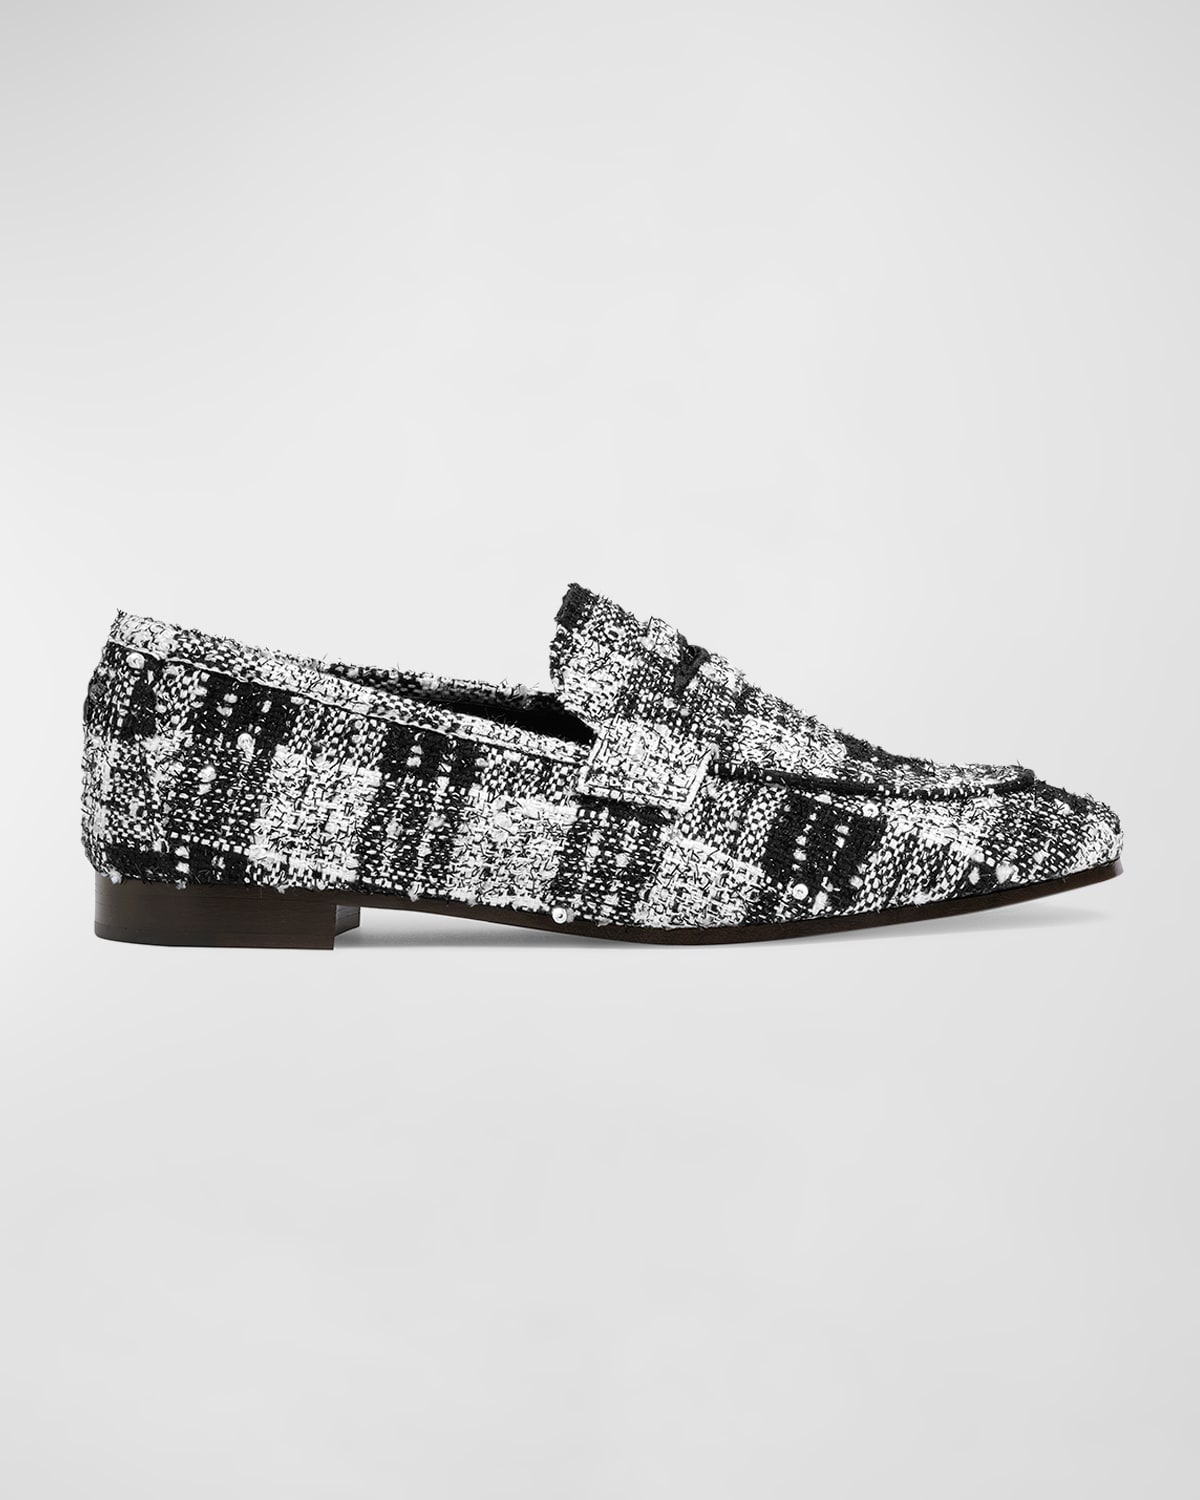 Bougeotte Flaneur Tweed Penny Loafers